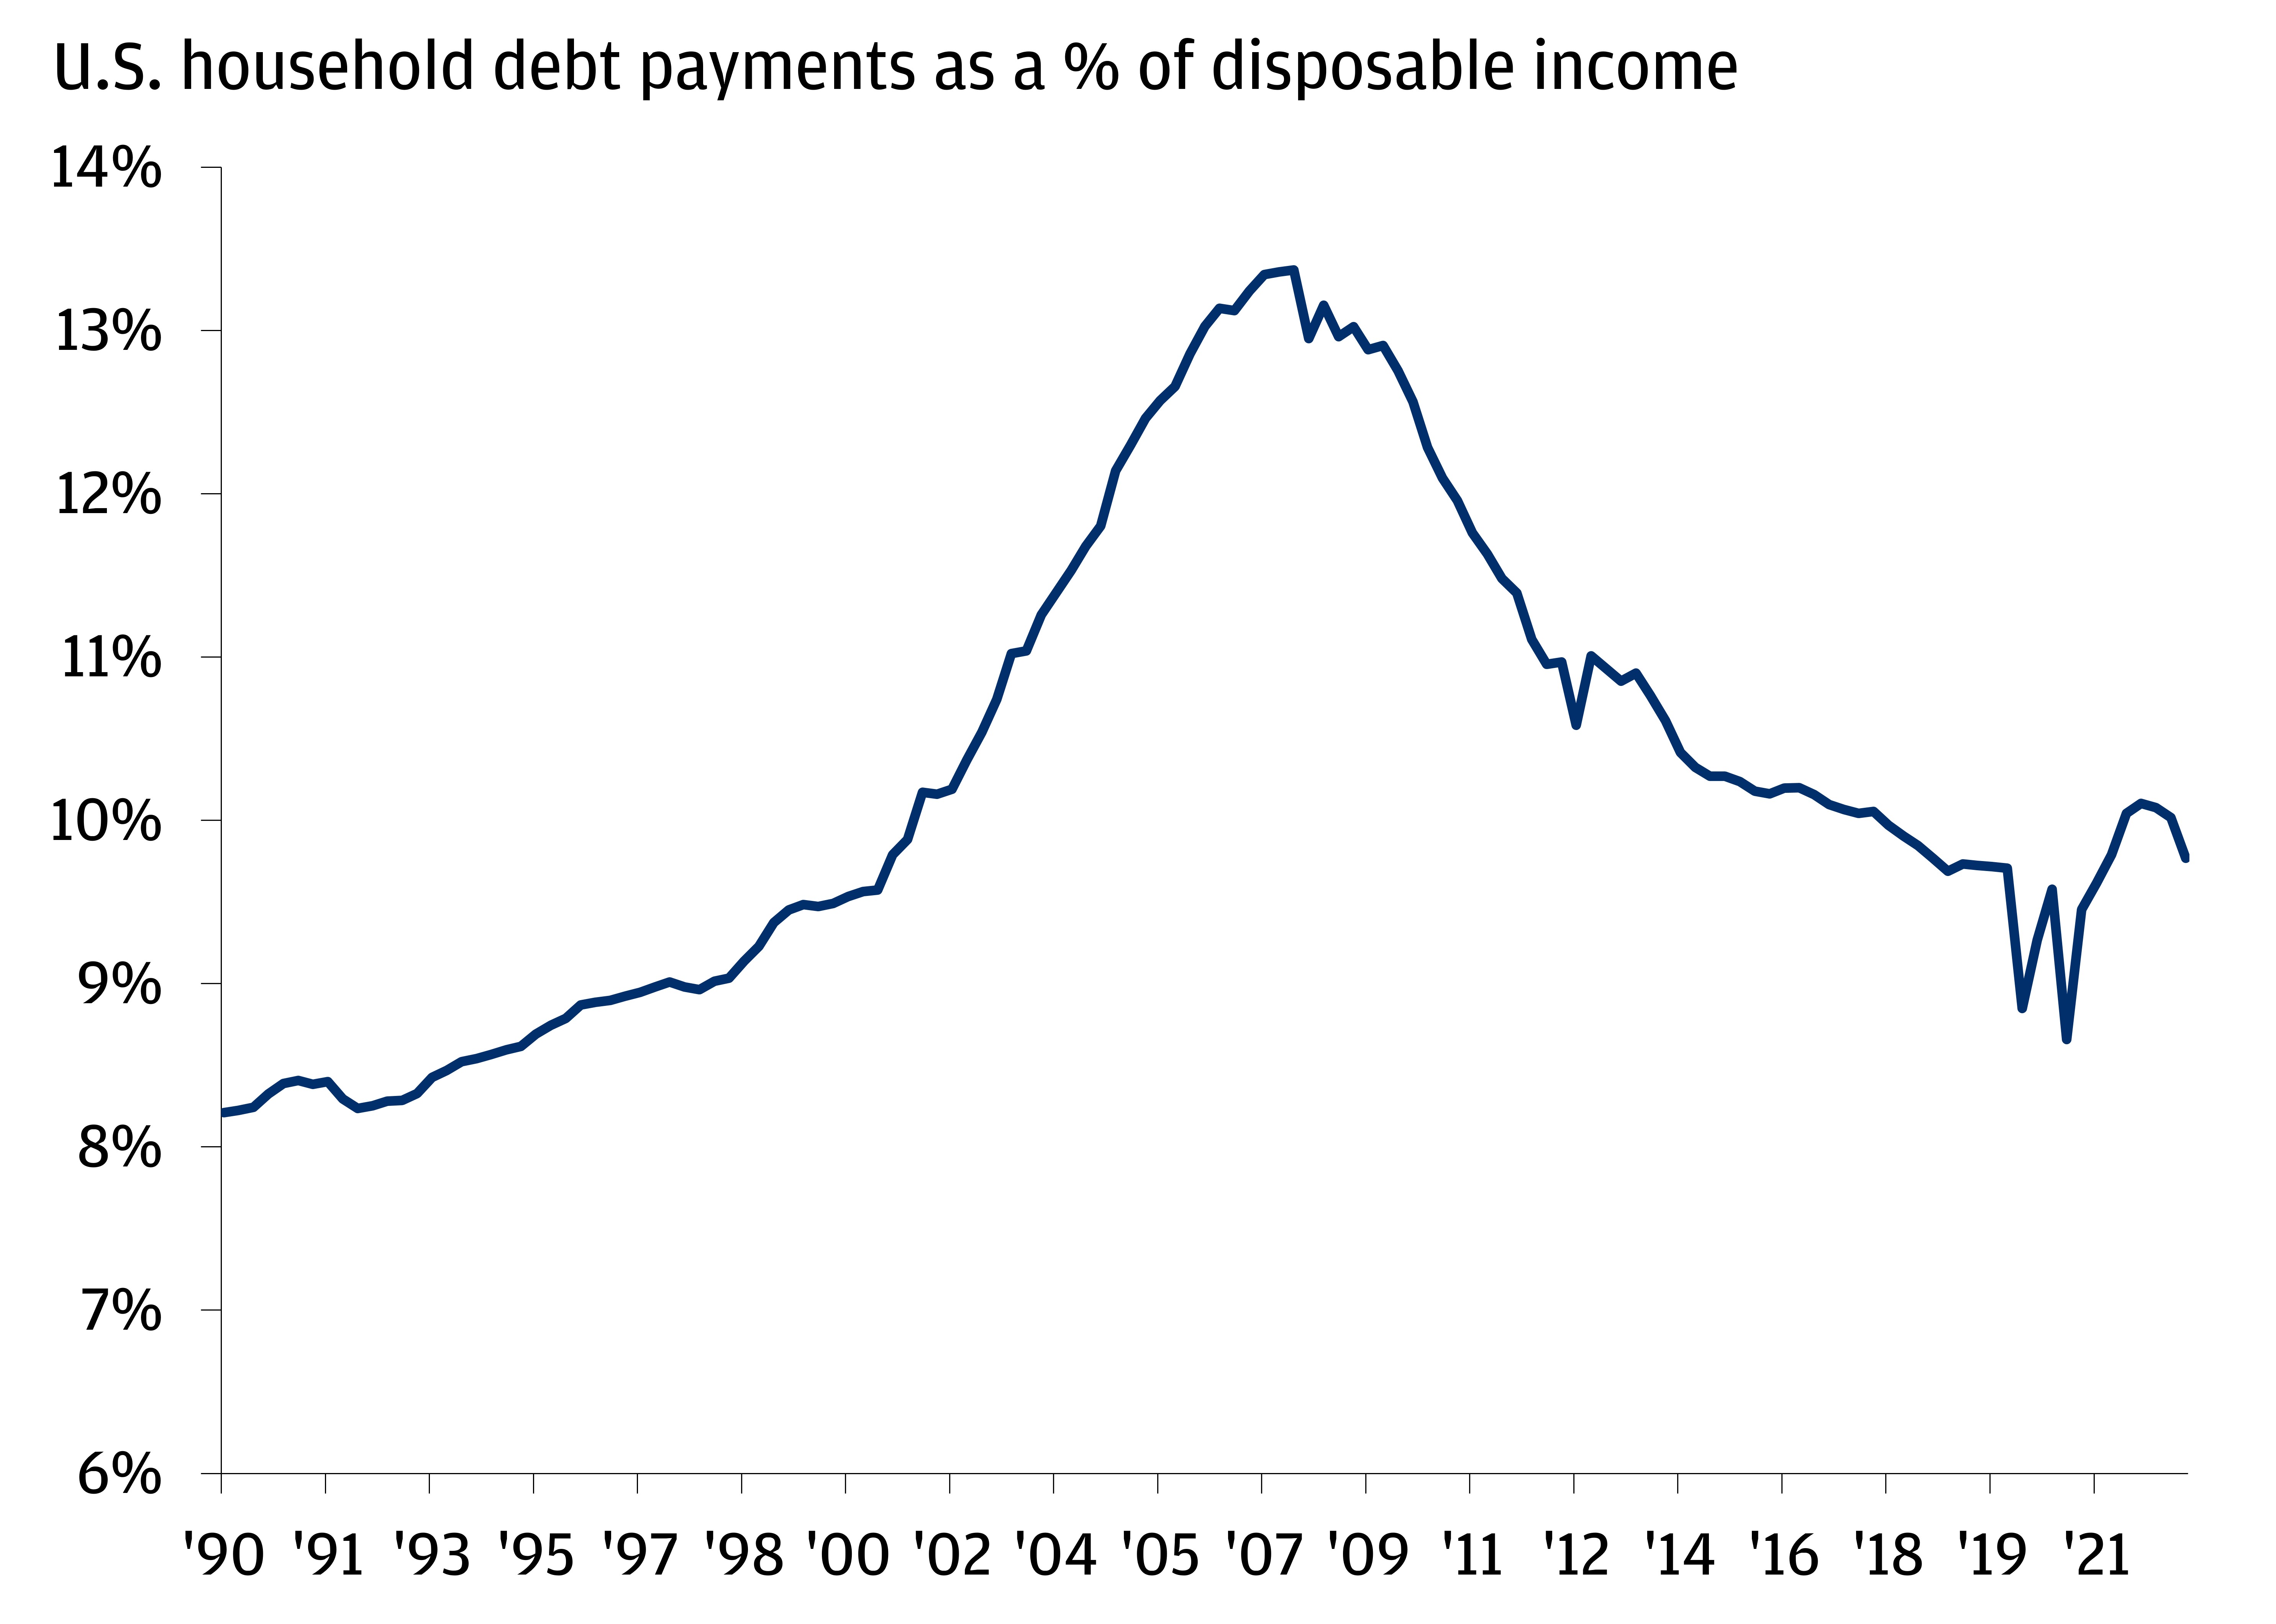 The chart describes the U.S. household debt payments as a % of disposable income.